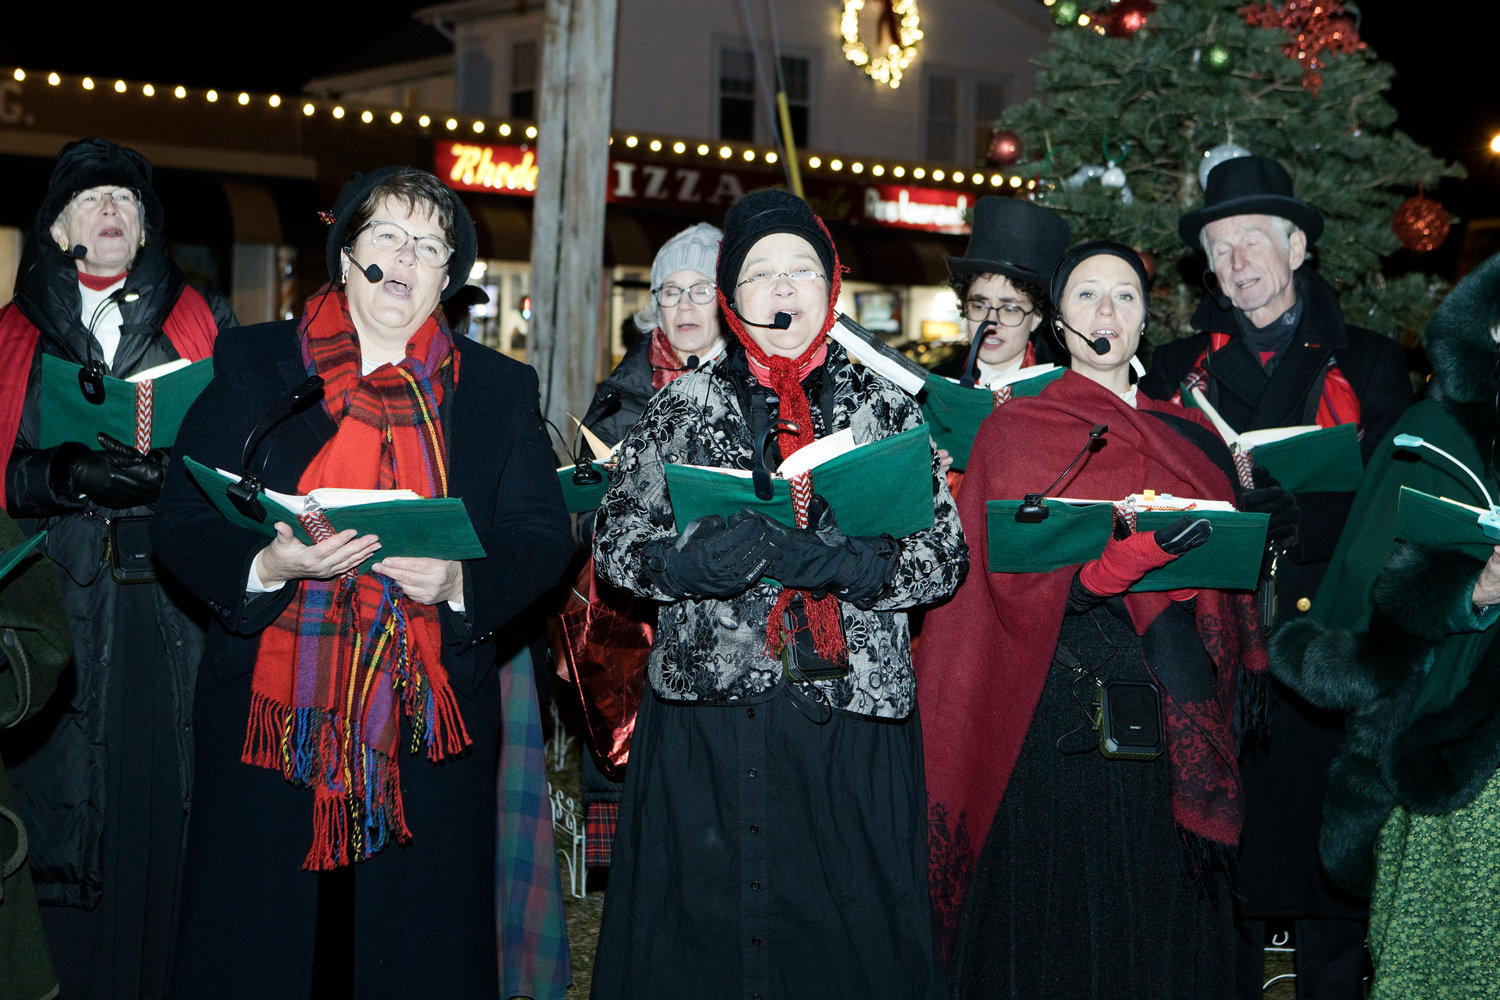 Members of "Voices of Christmas" entertain guests with Christmas carols while waiting for Santa to arrive at the Riverside Renaissance Movement Tree Lighting, Friday, Dec. 3.